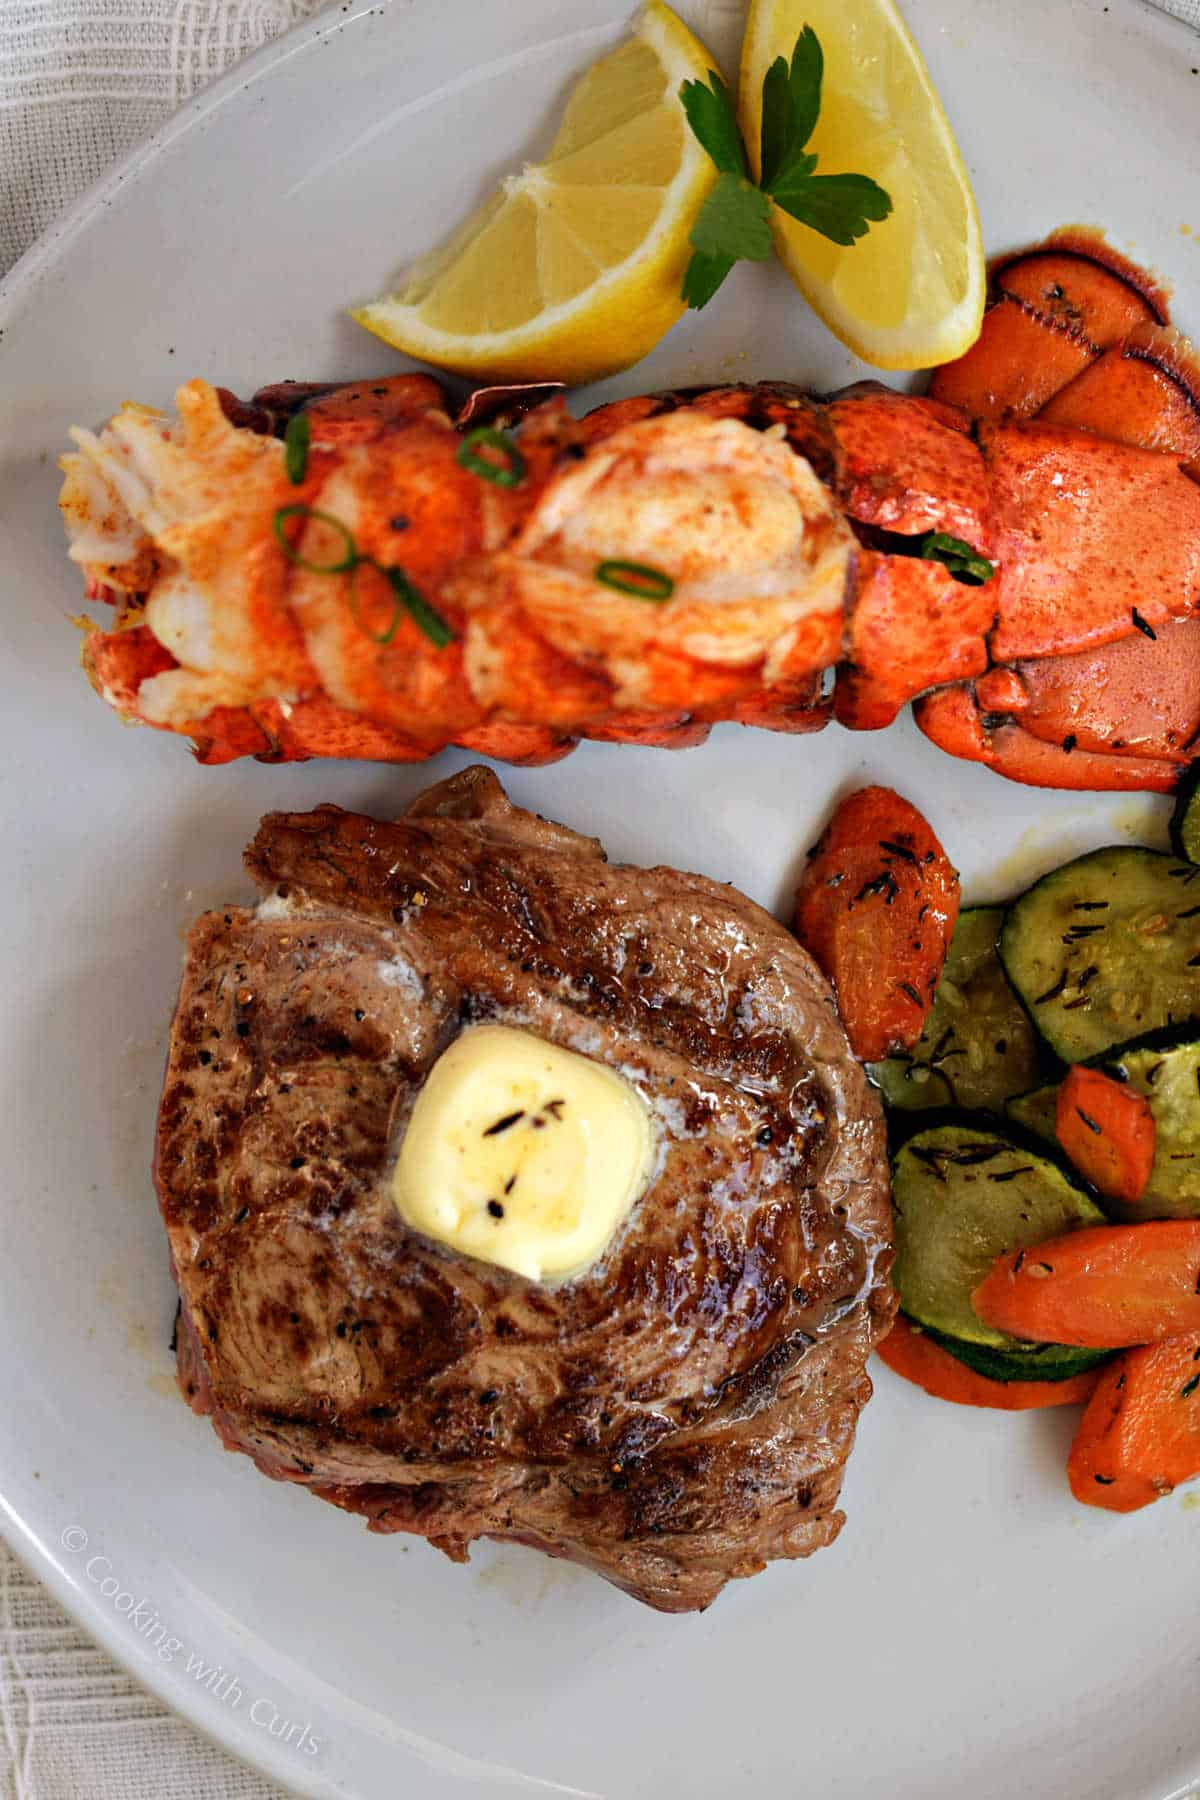 Broiled lobster tail and steak with sautéed zucchini and carrots on the side.